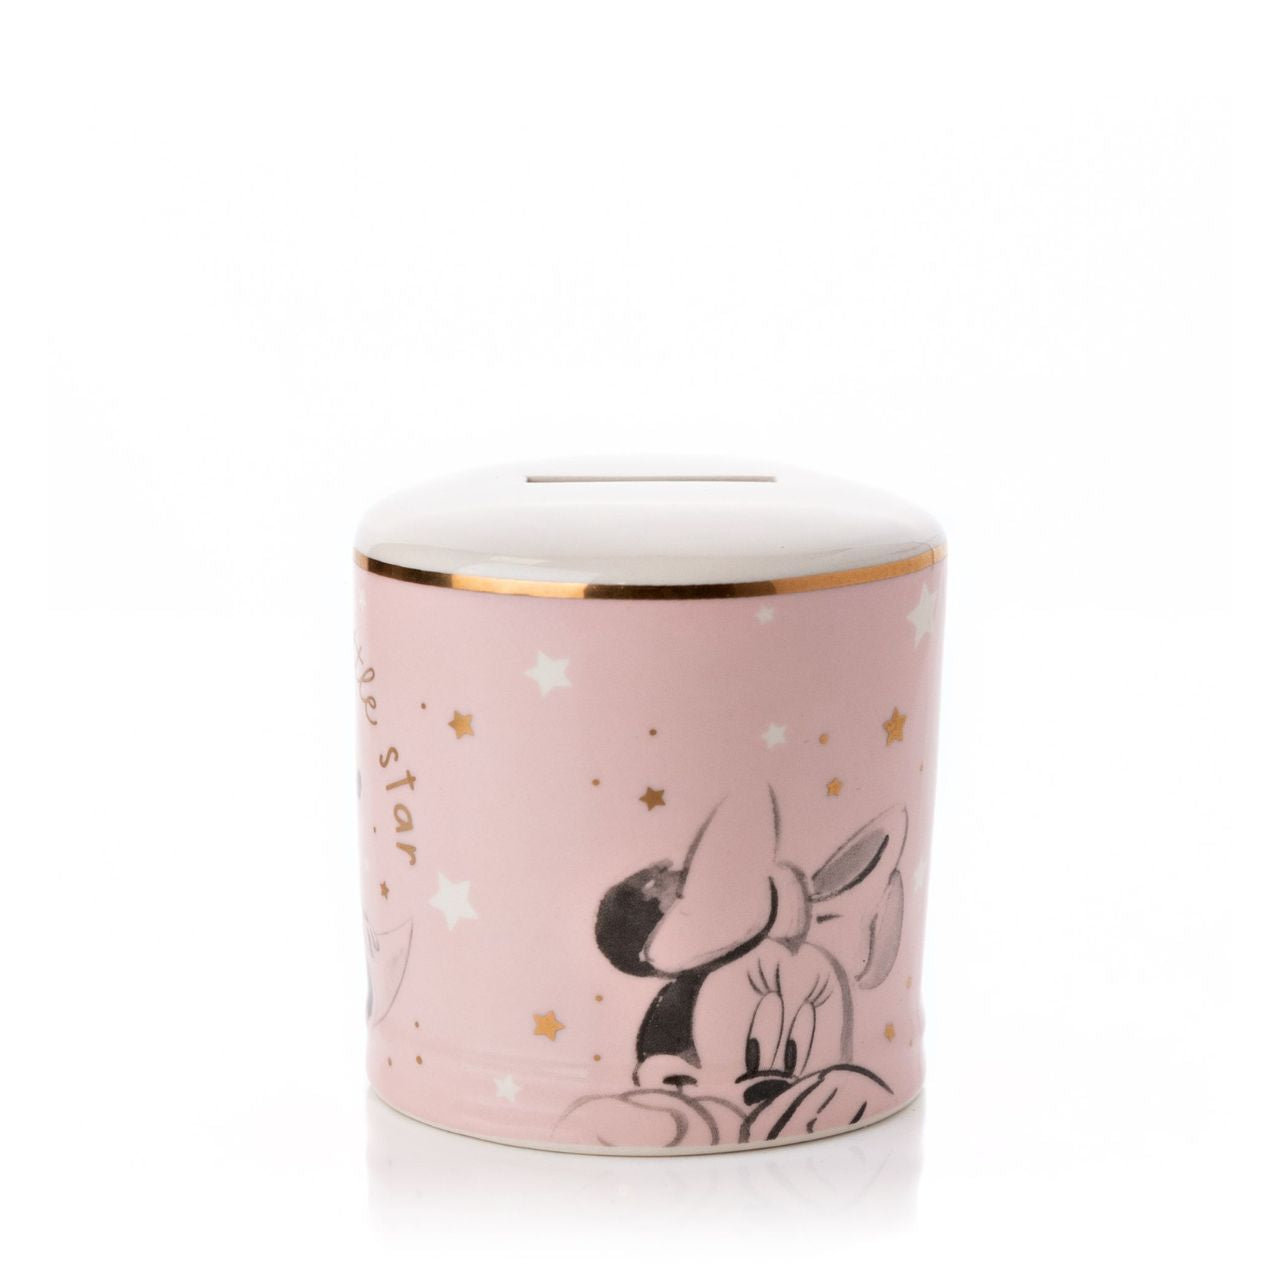 Help your little one save for a magical day with this beautiful ceramic money box.  With a sweet Minnie Mouse design, this accessory makes a beautiful addition to a nursery.